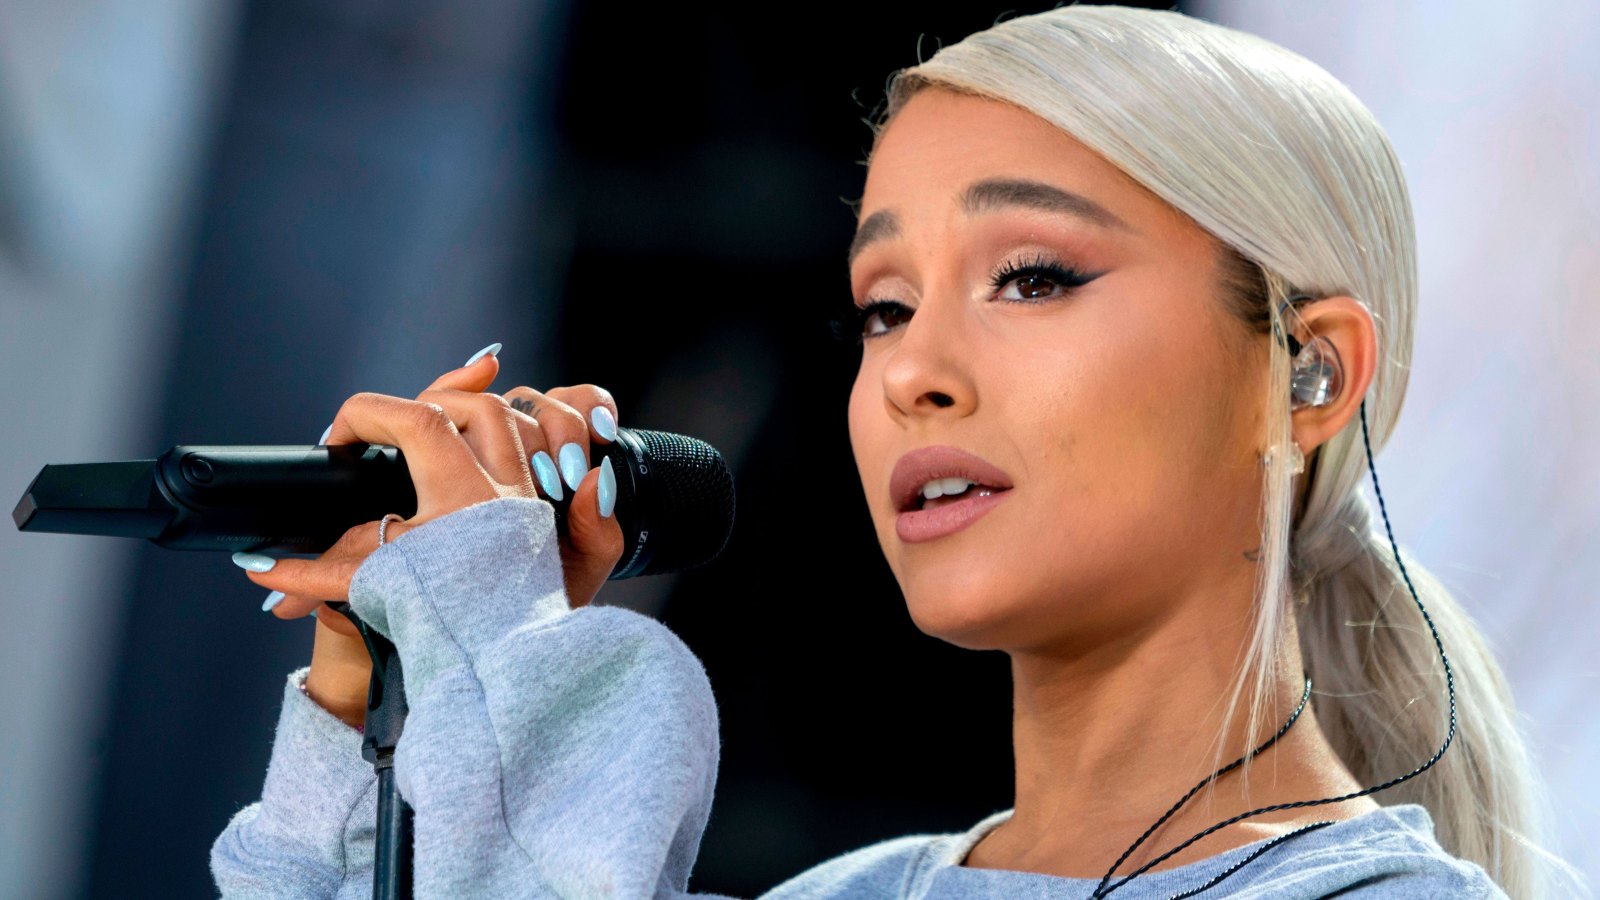 Ariana Cancels Concert After Waking Up Feeling '10 Times Worse